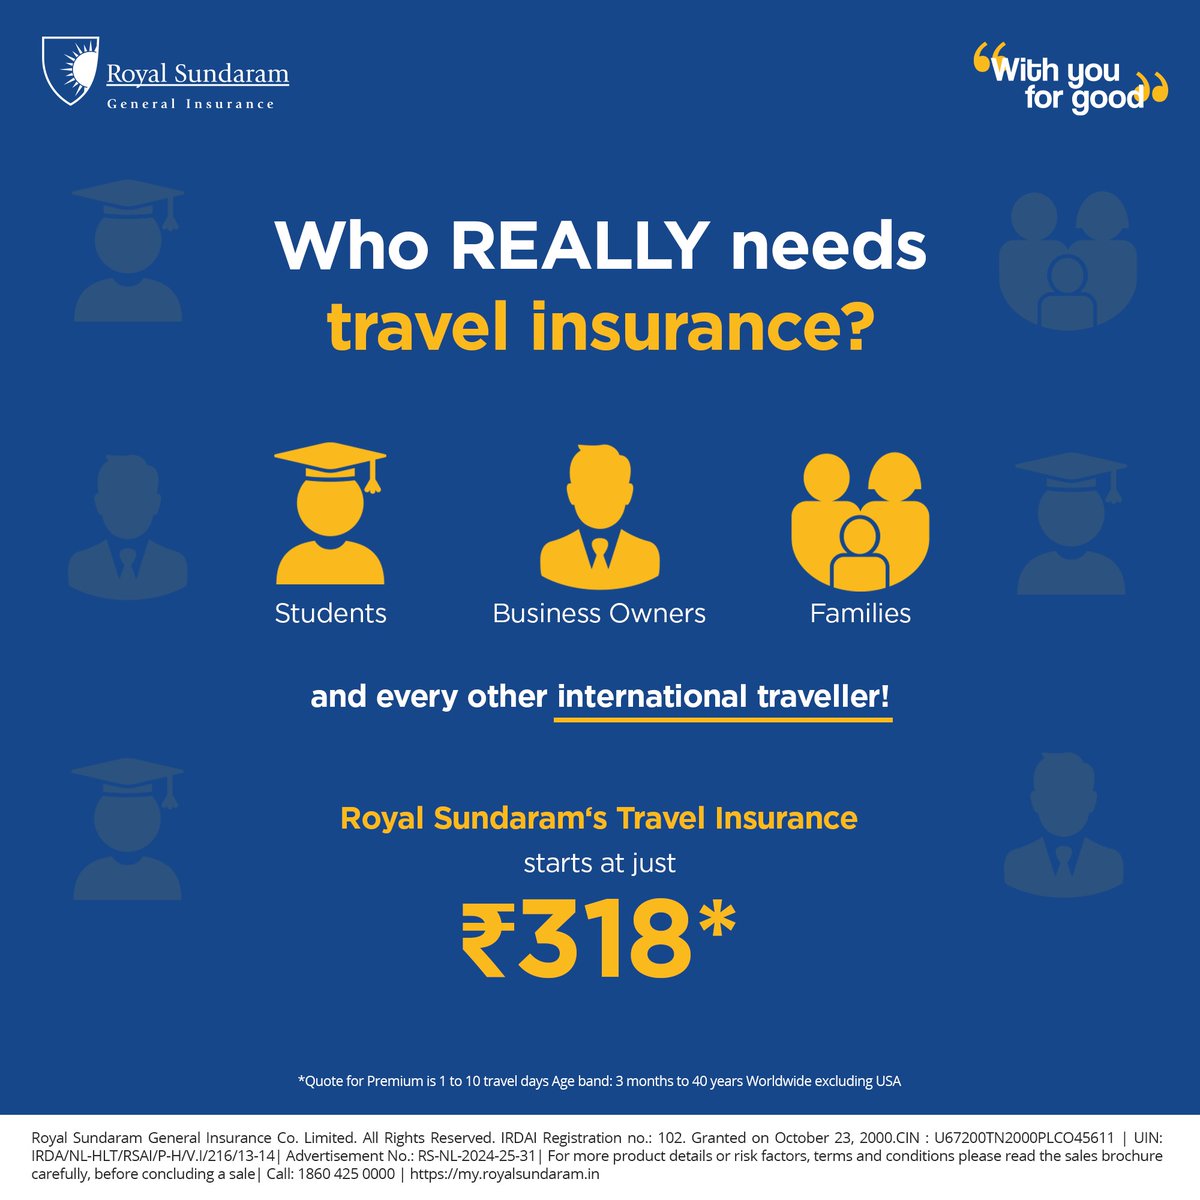 Whether you're a student heading out for your degree or a frequent flyer who travels for work, you will need Royal Sundaram Travel Insurance. So make each trip count because premiums start at just ₹318*
#royalsundaramgeneralinsurance #royalsundaramtravelinsurance #withyouforgood